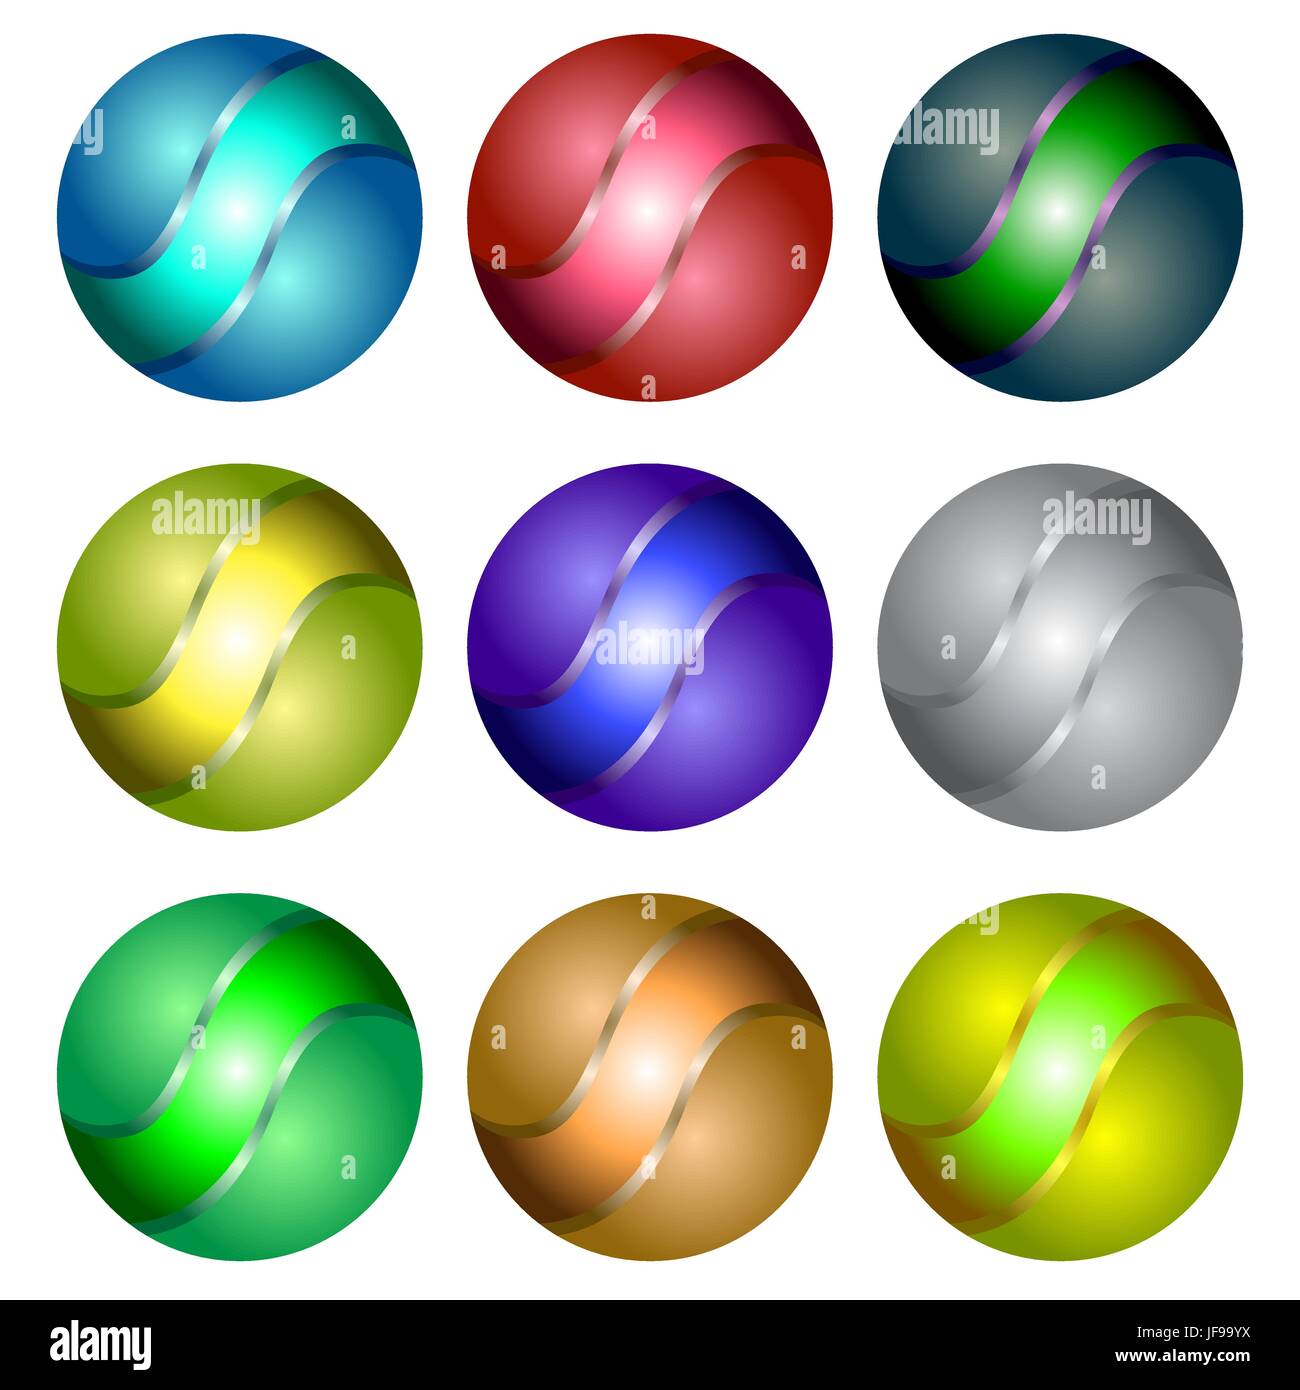 Set of Different Colorful Spheres Isolated on White Background Stock Vector